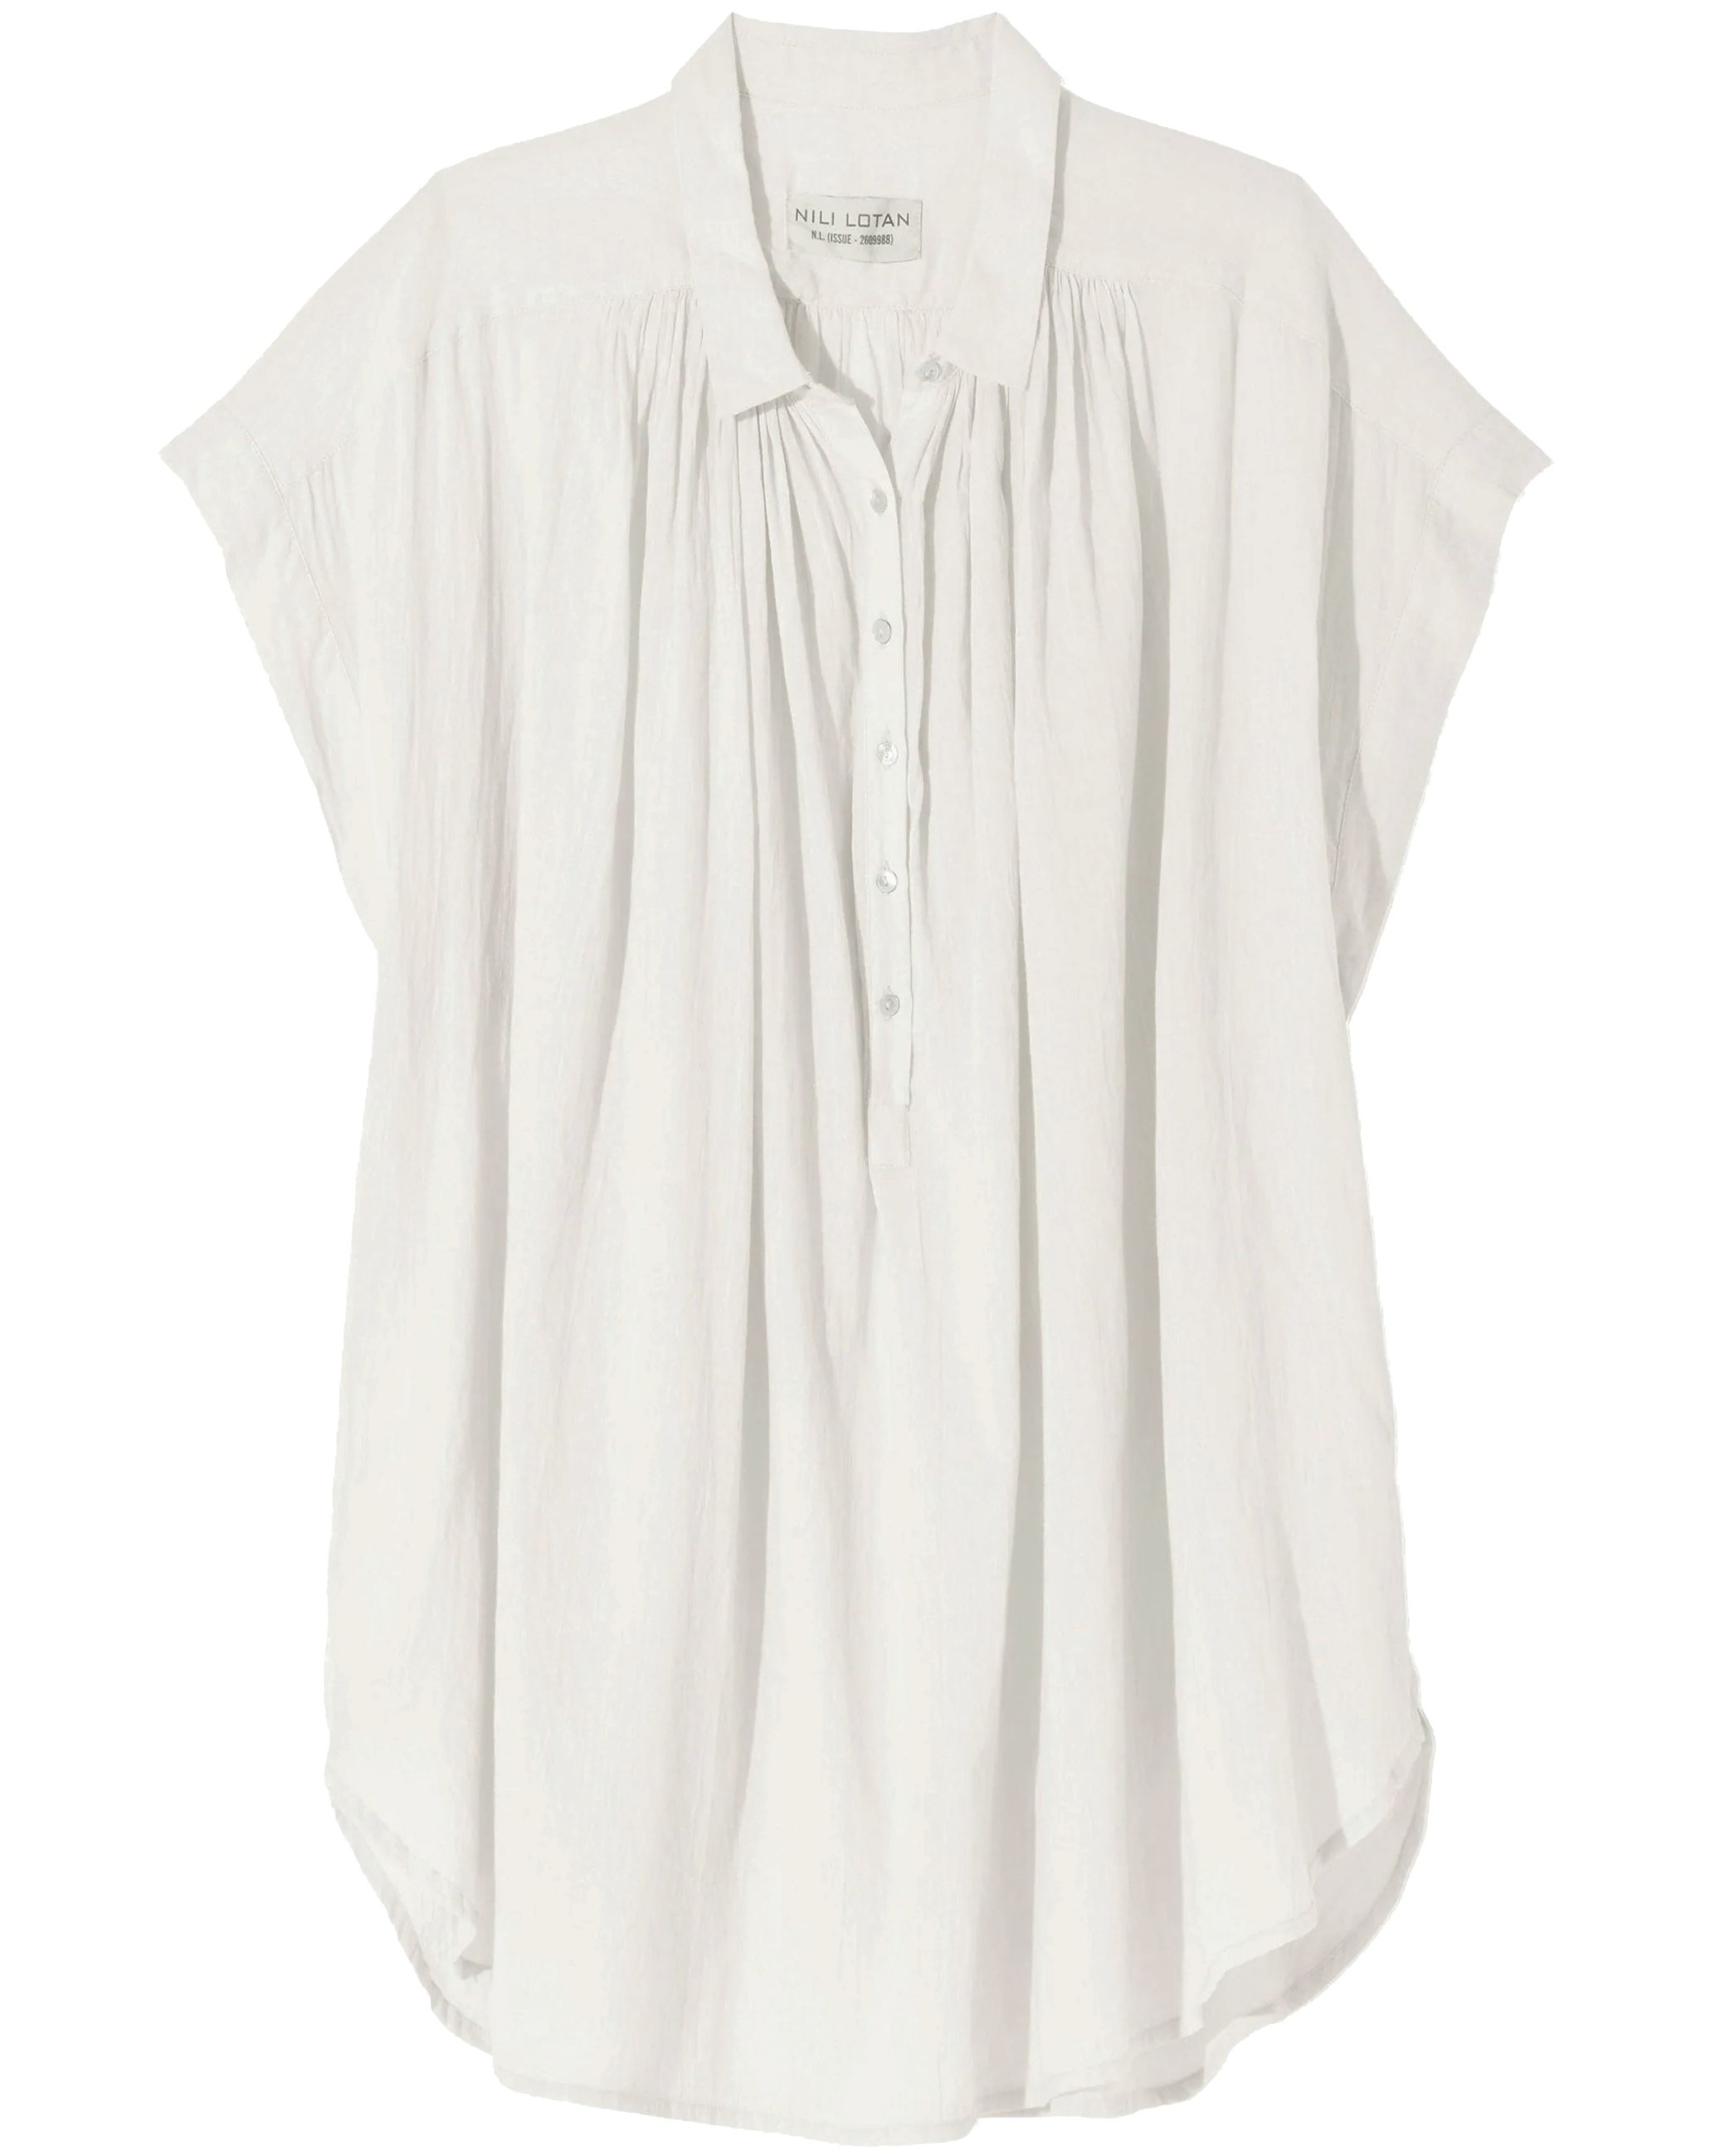 NILI LOTAN Cotton Voile Blouse Normandy in Ivory S